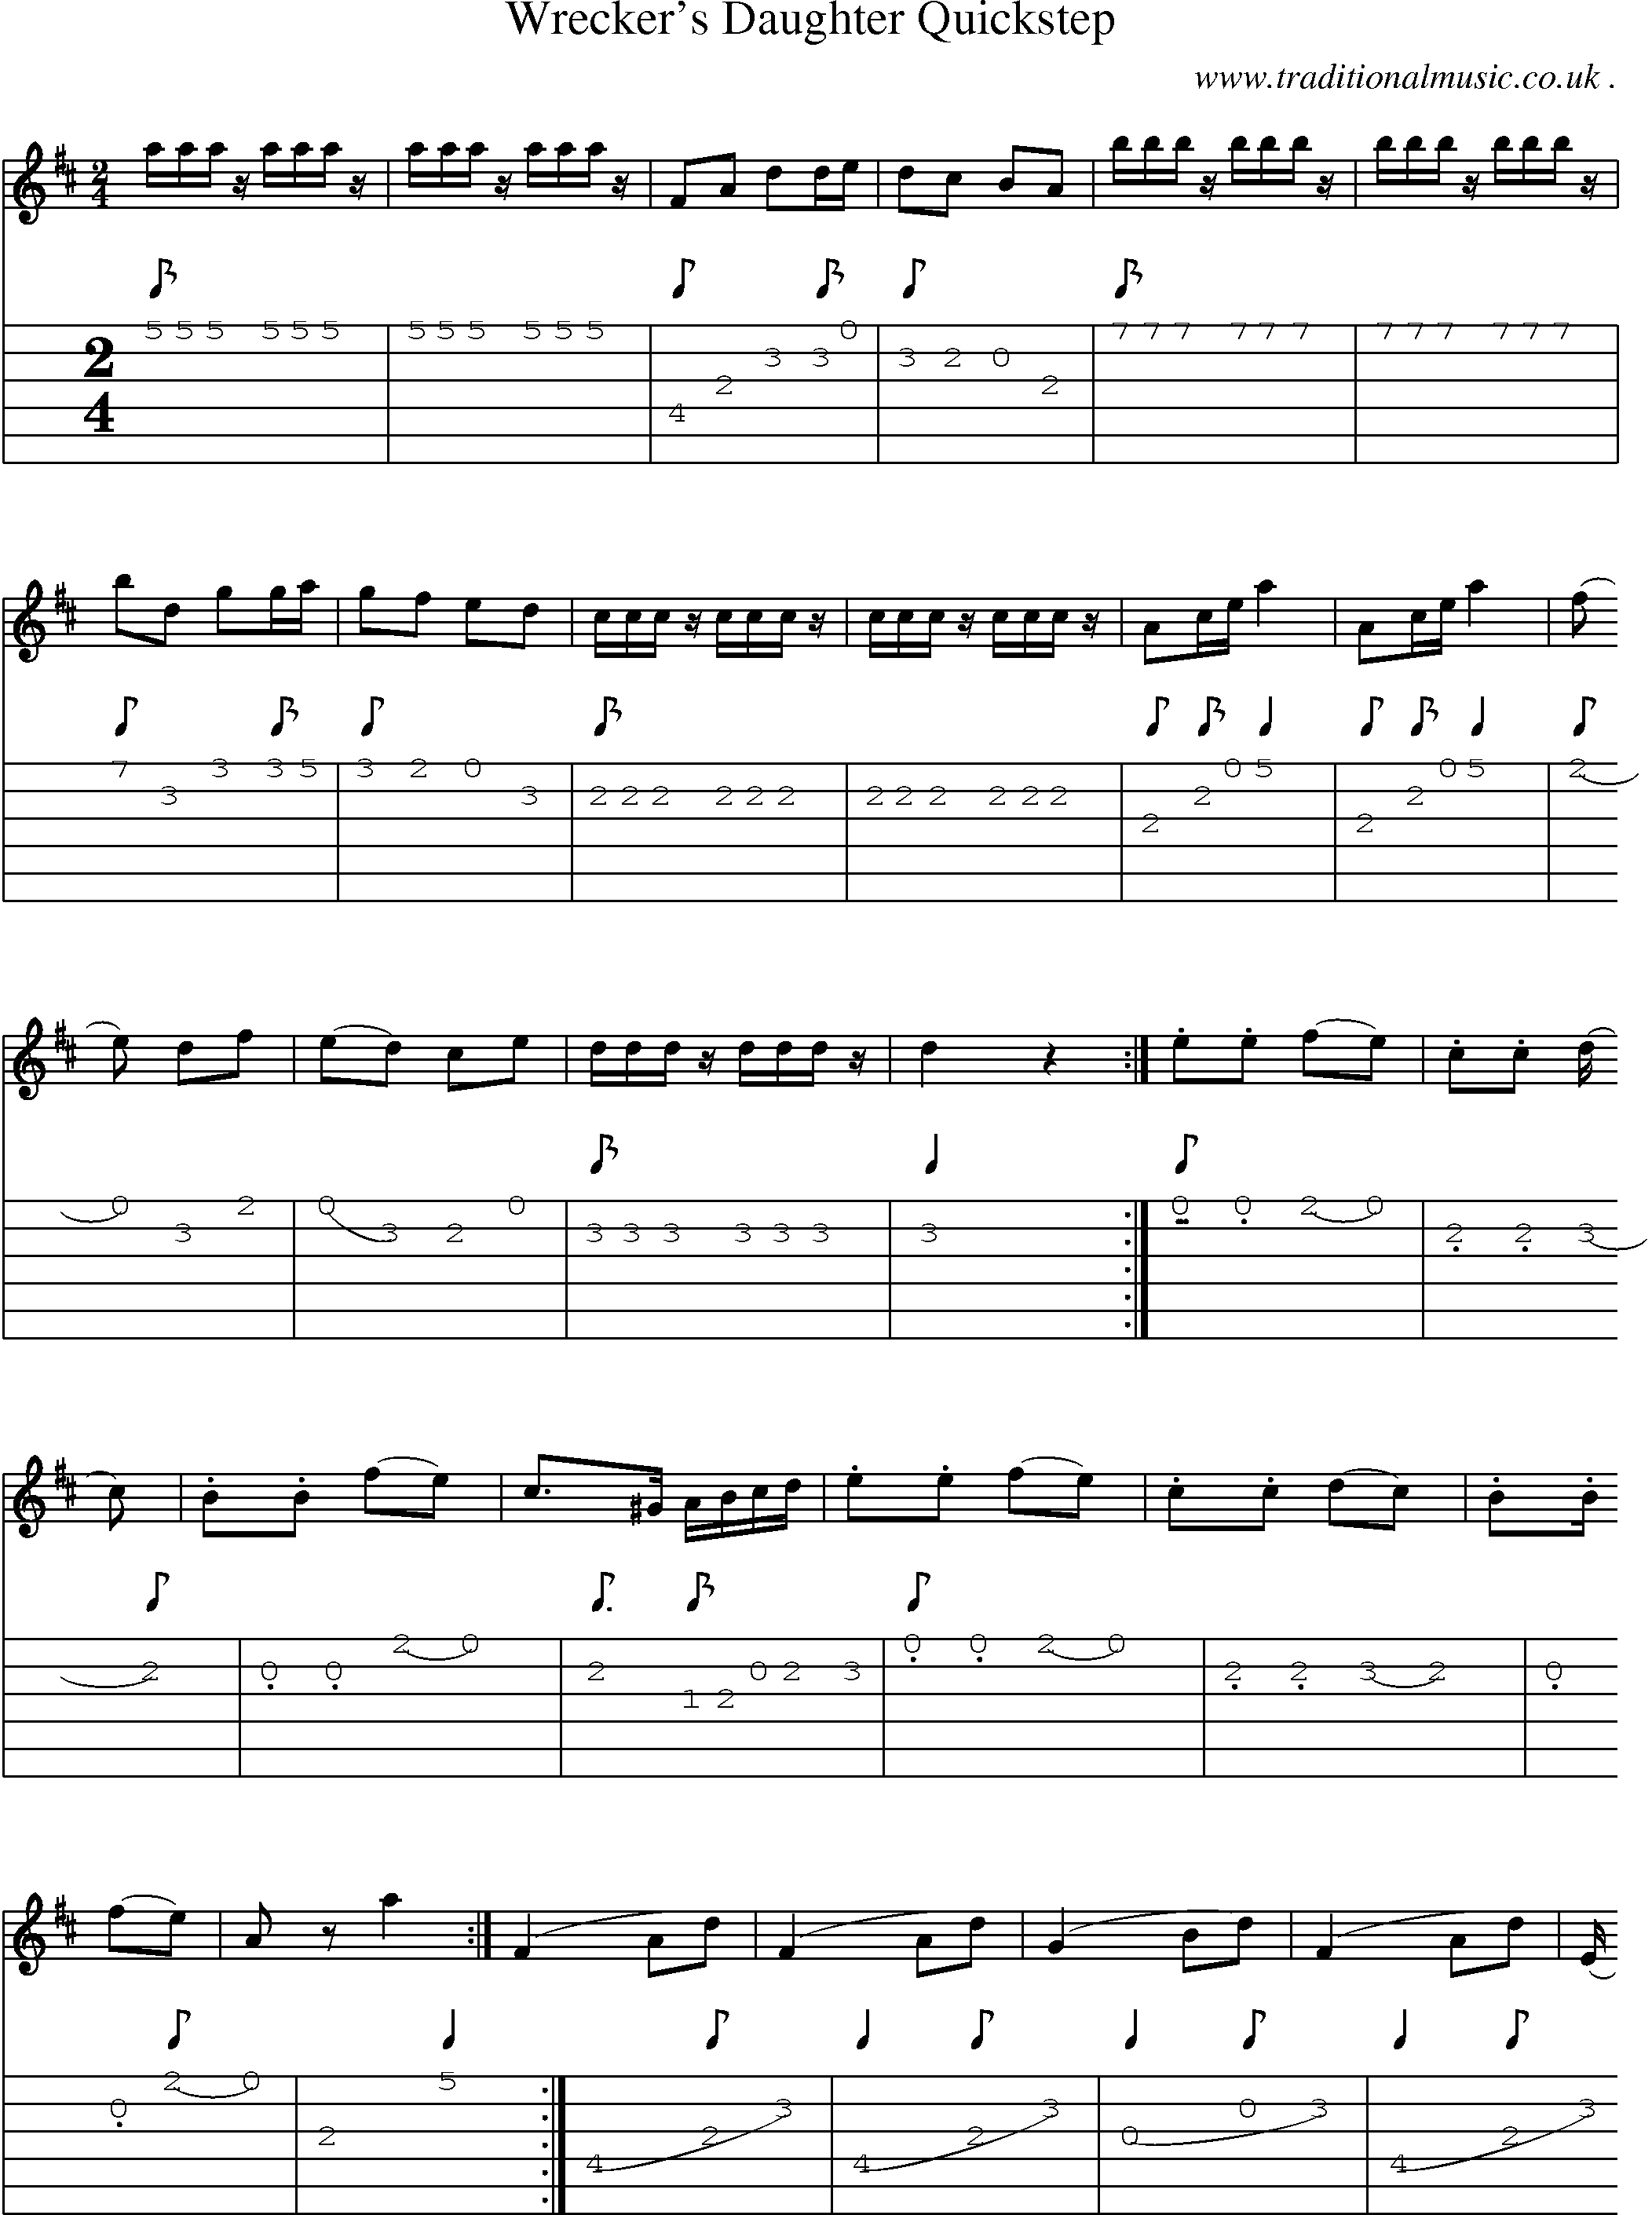 Music Score and Guitar Tabs for Wreckers Daughter Quickstep